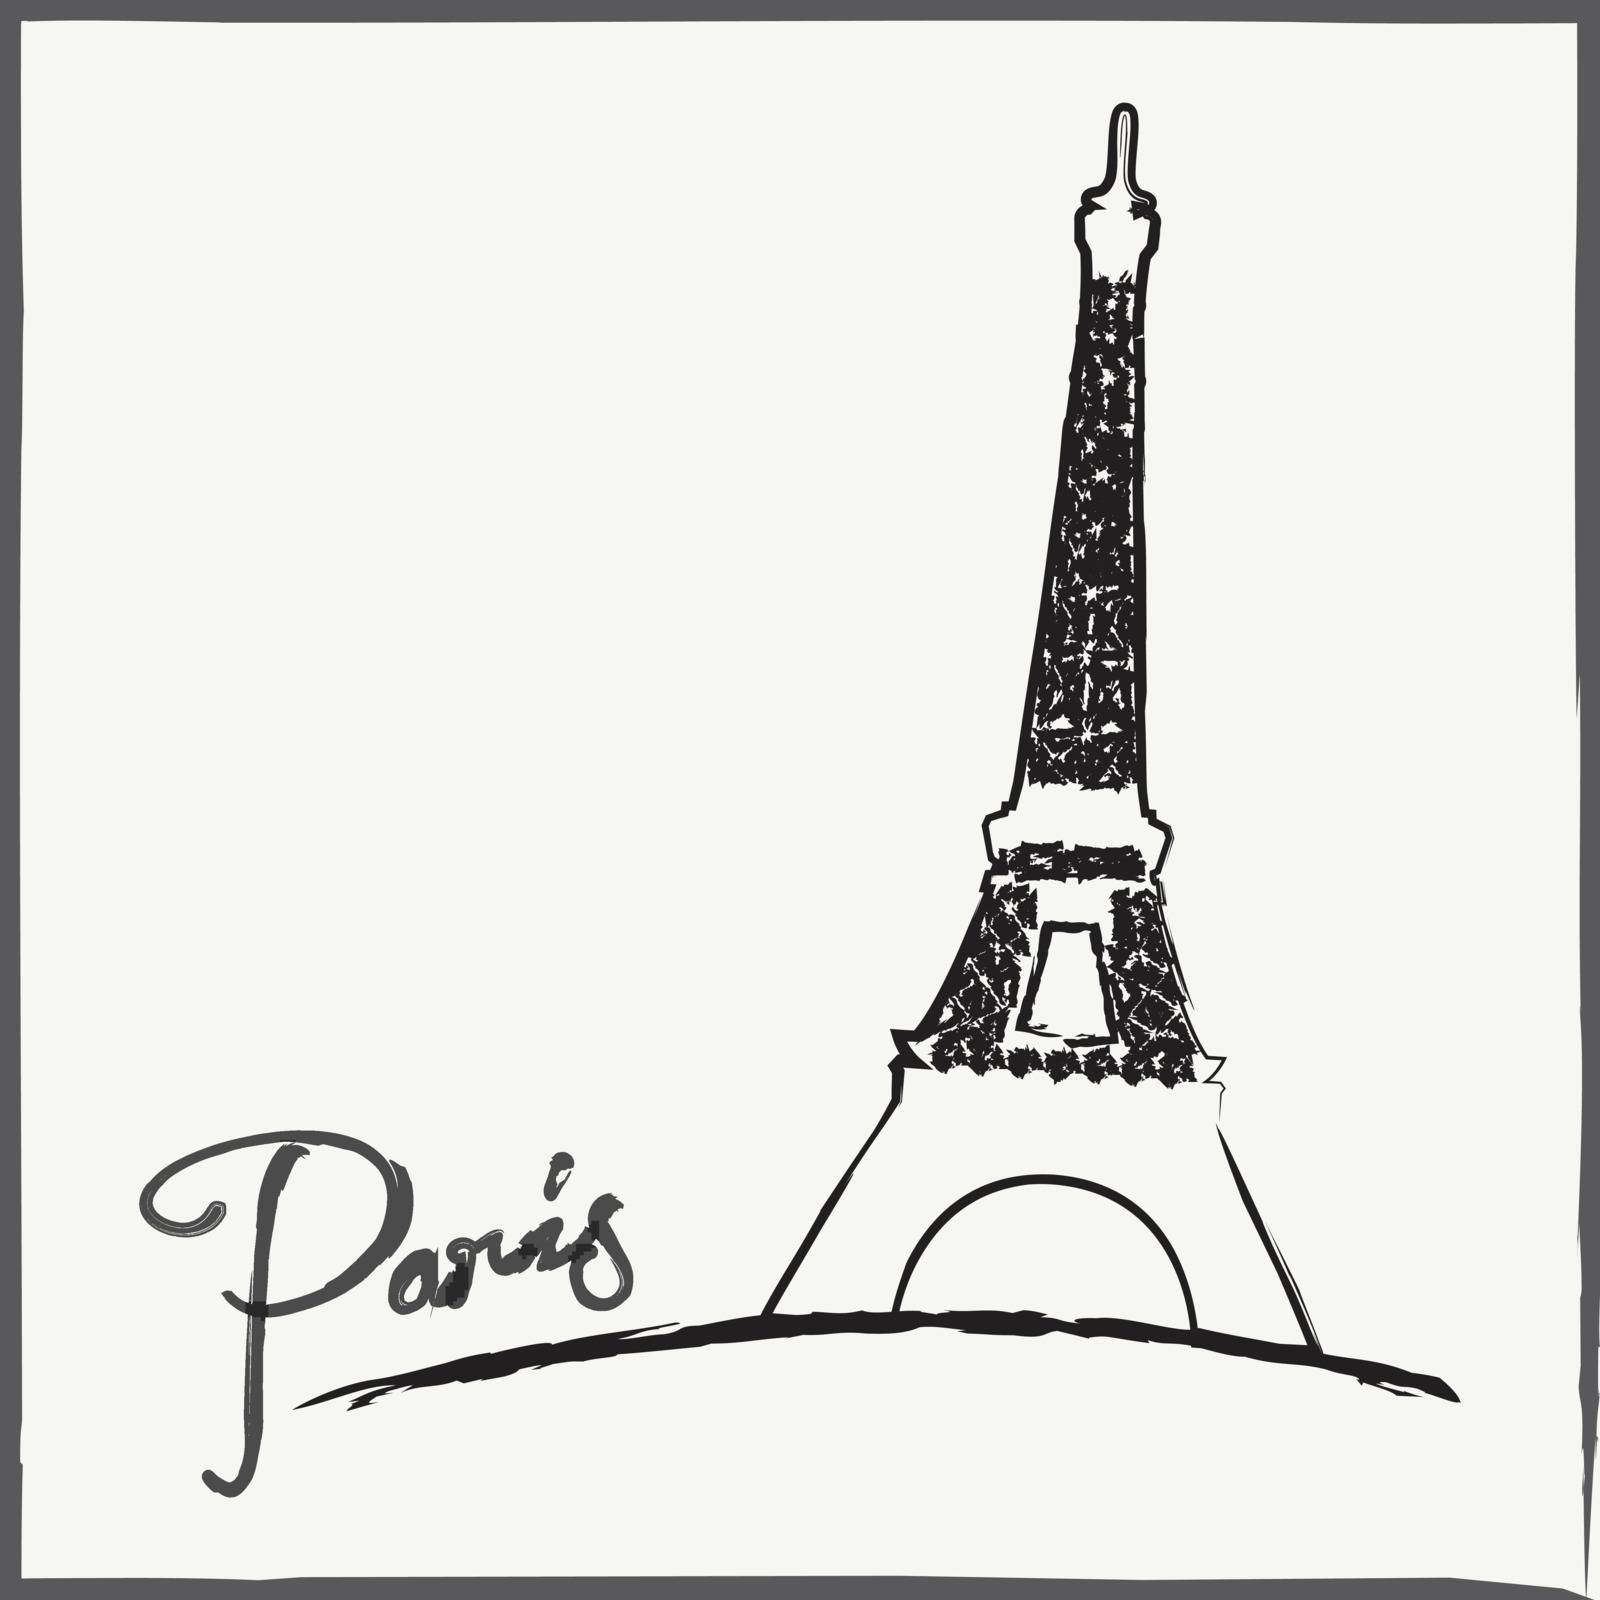 Abstract vintage background. Brushed illustration with Eiffel tower.